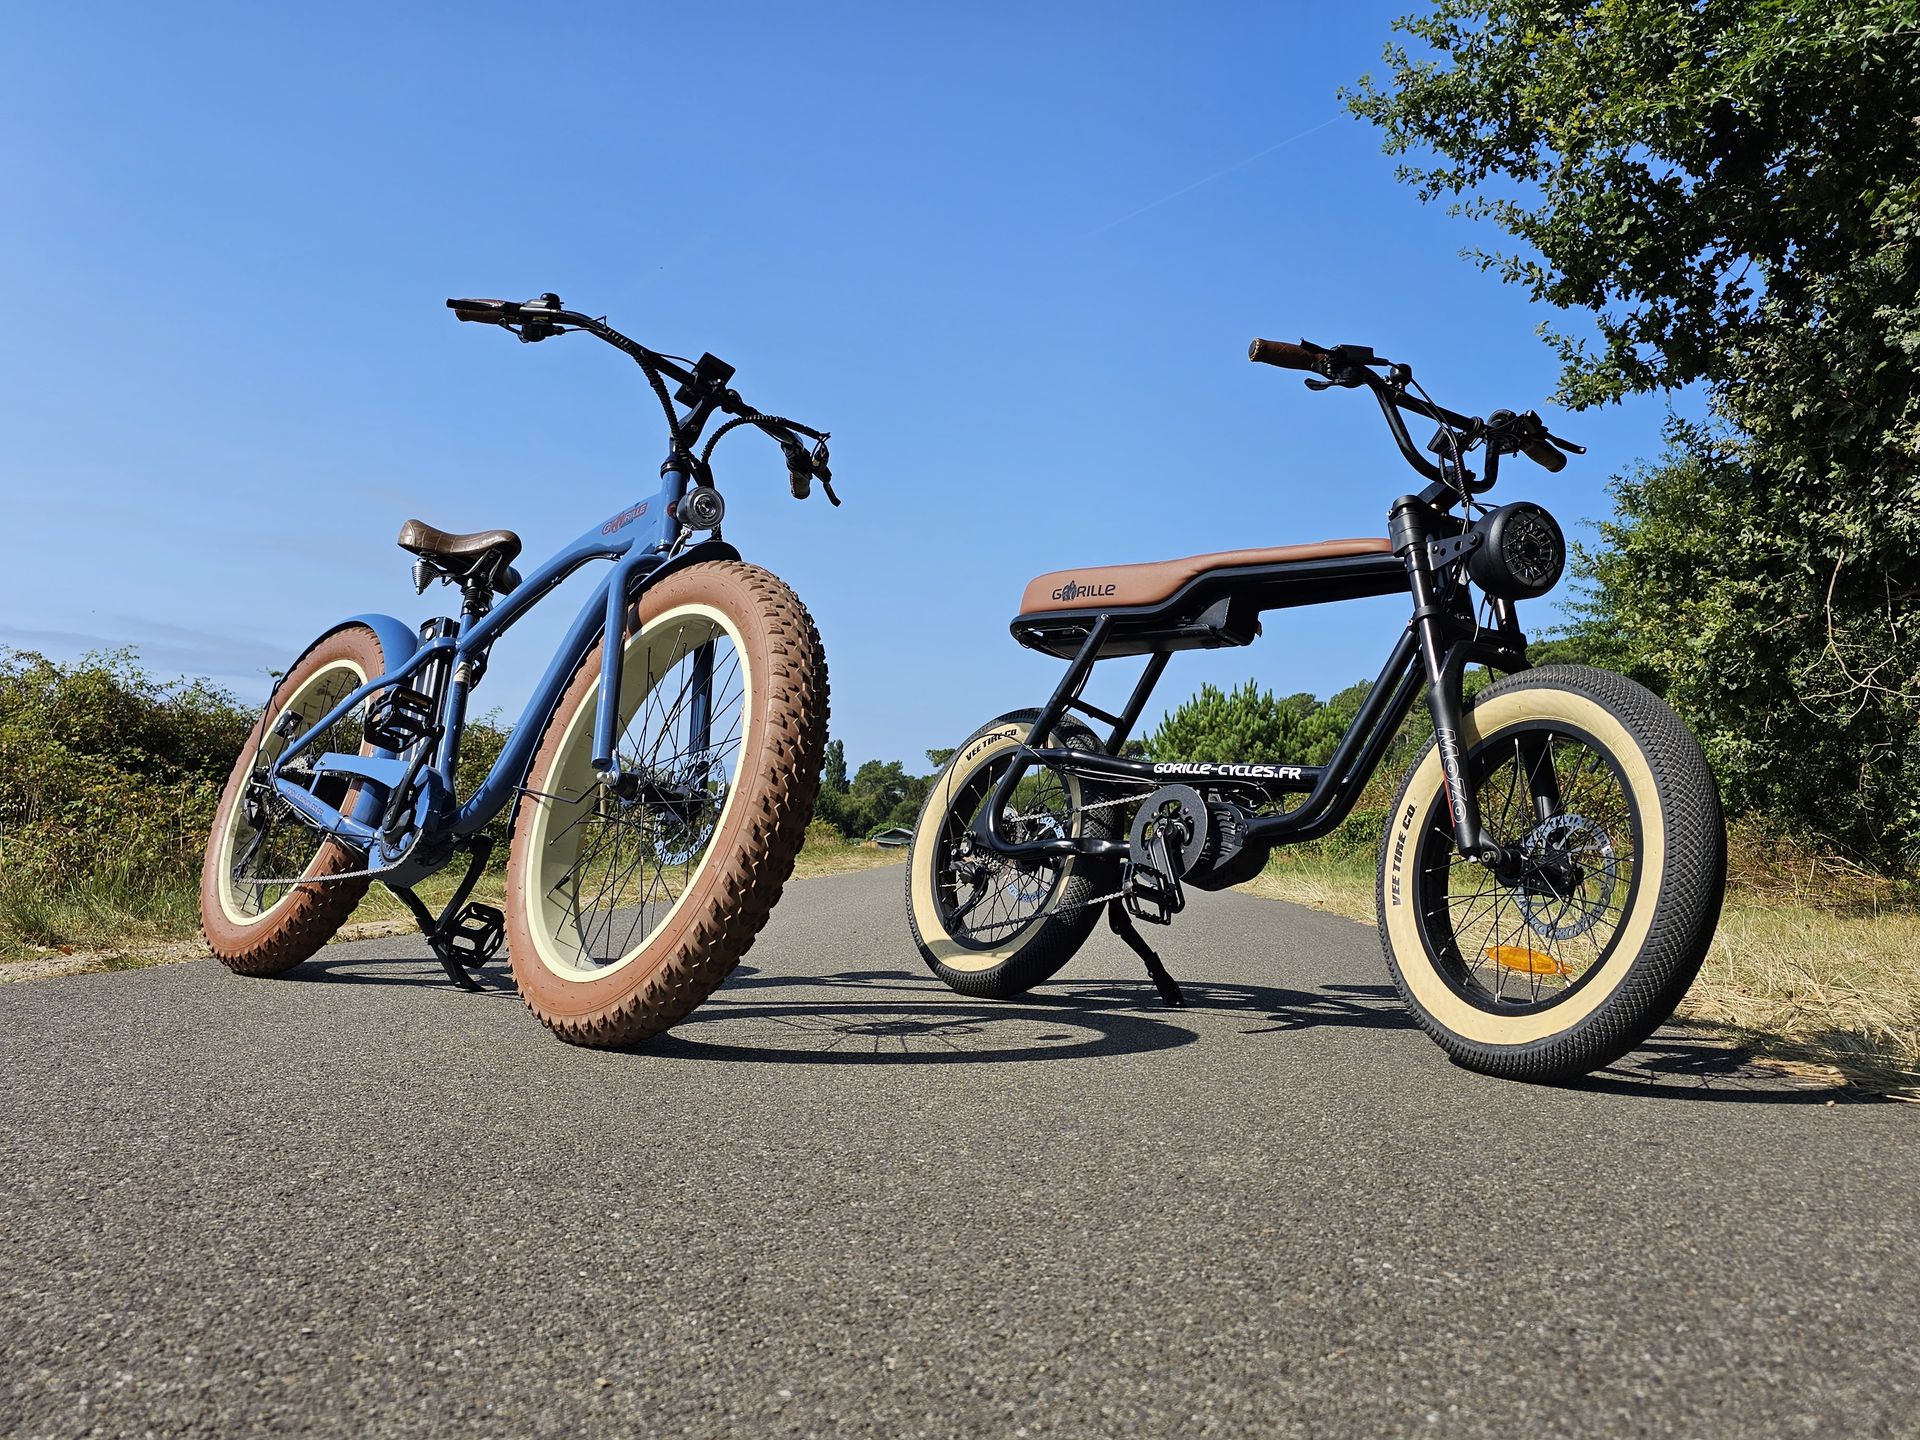 Gorille Tricycle – Gorille Cycles